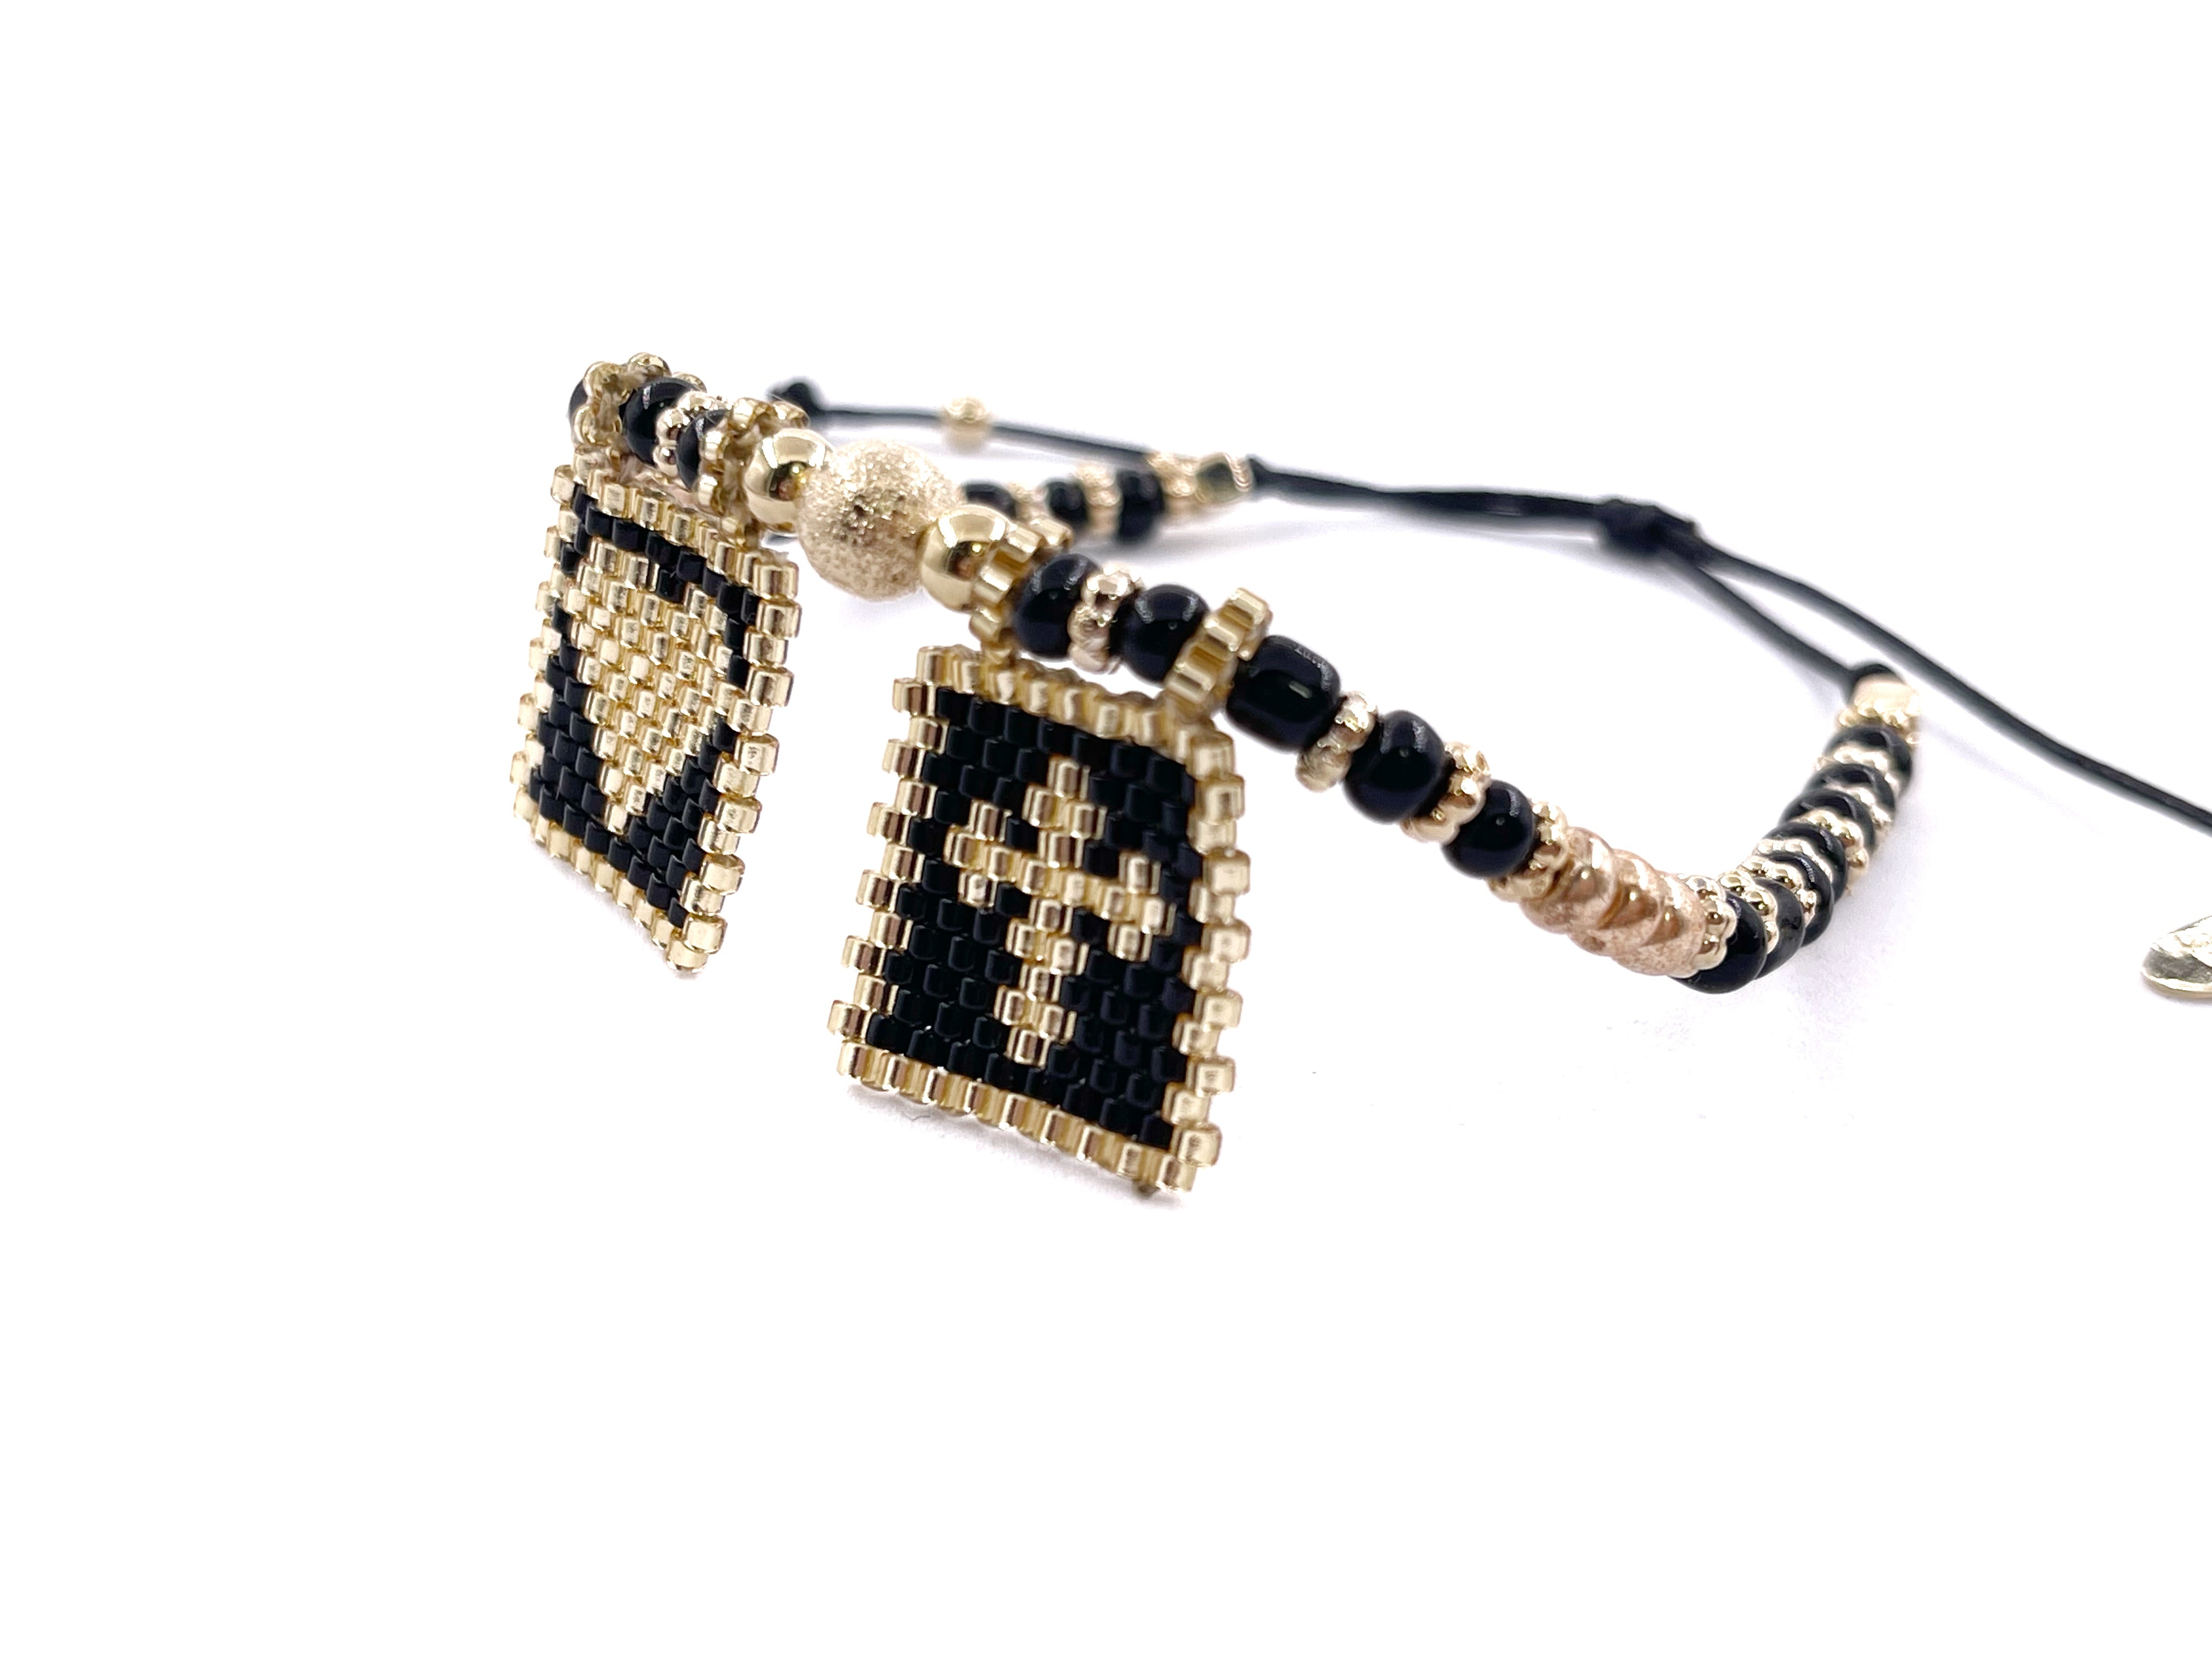 Adjustable Beaded Scapular Medal Duo Black Bracelet, Color Glass Seed Beads, Handwoven with Heart and Cross Symbols.